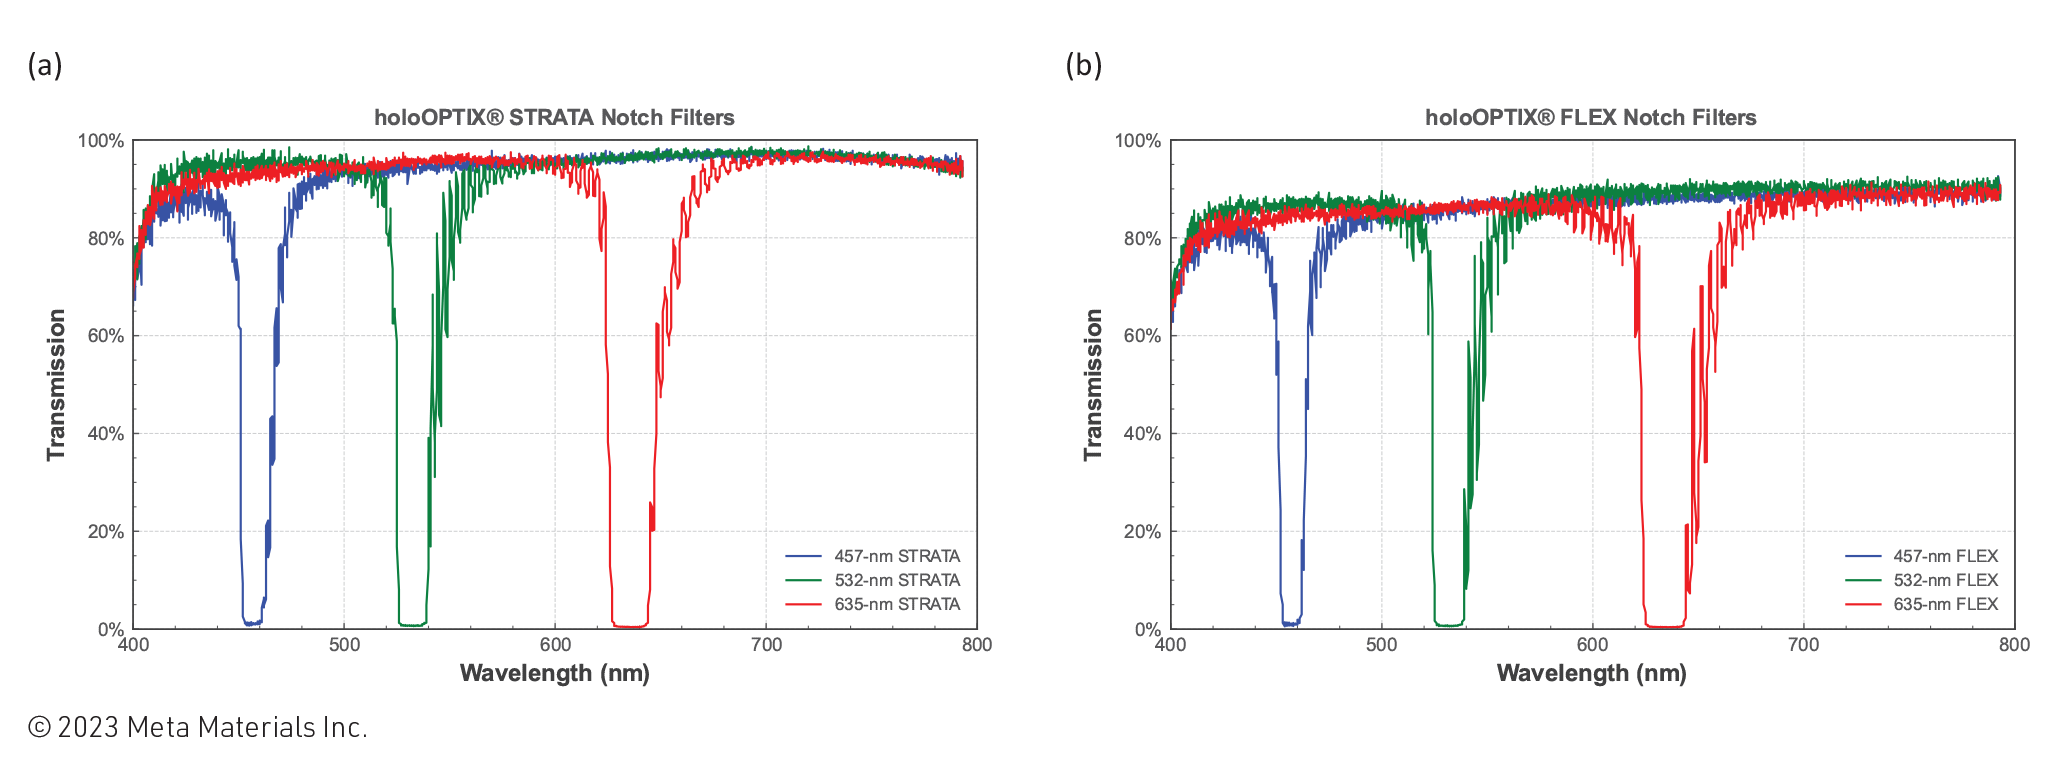 Figure 3. Visible transmission curves of holoOPTIX® (a) STRATA and (b) FLEX notch filters